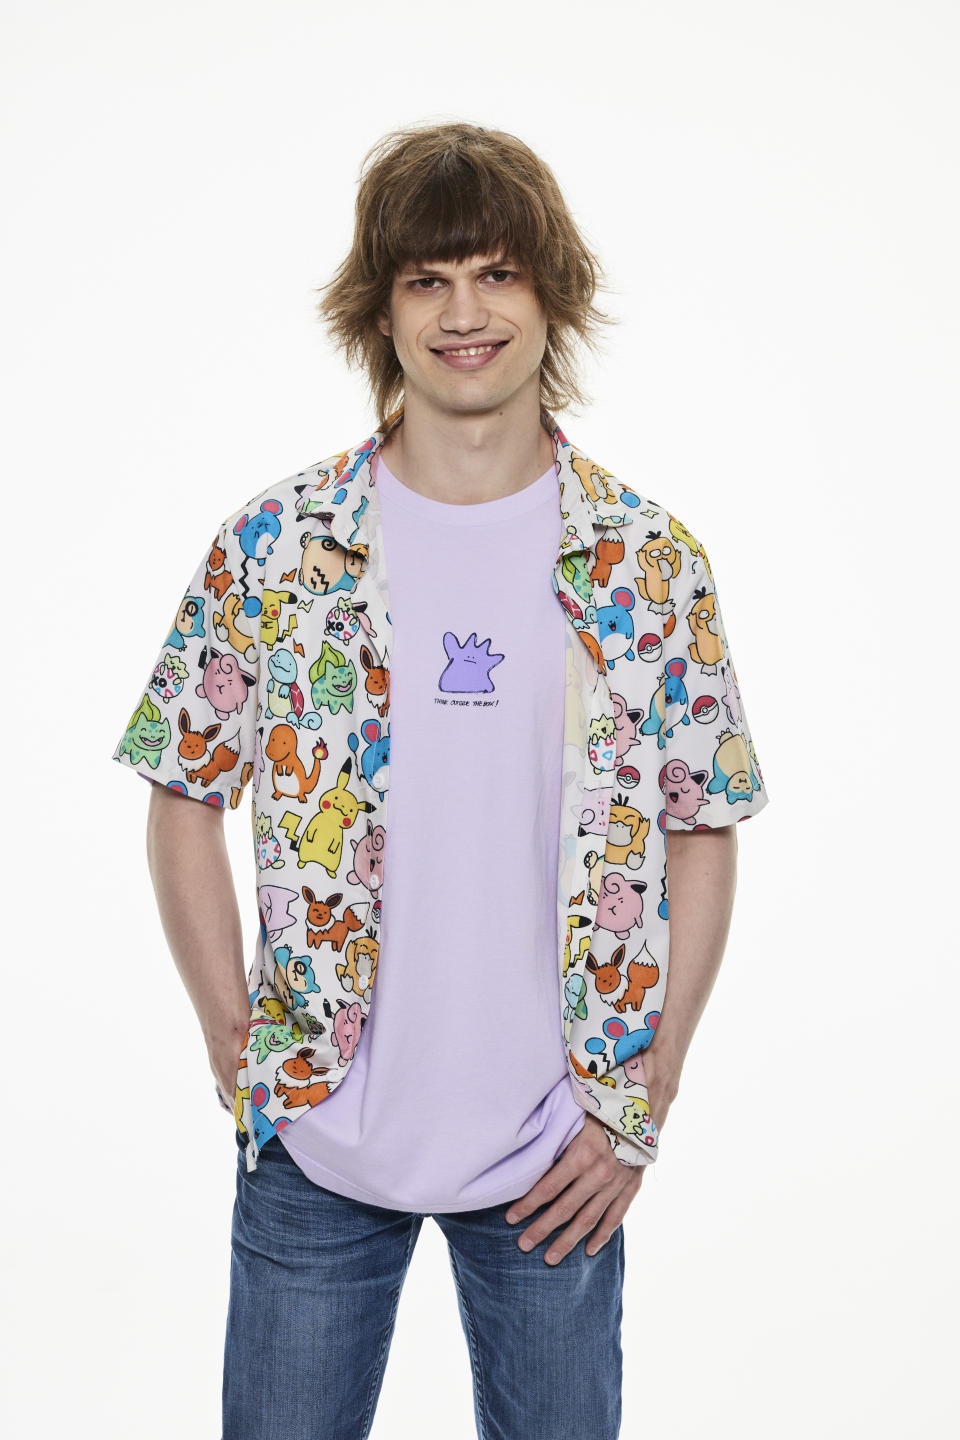 A man with brown hair stands smiling on a white background in blue jeans, lavender Ditto tee and a white shirt featuring a vast array of colourful Pokemon.